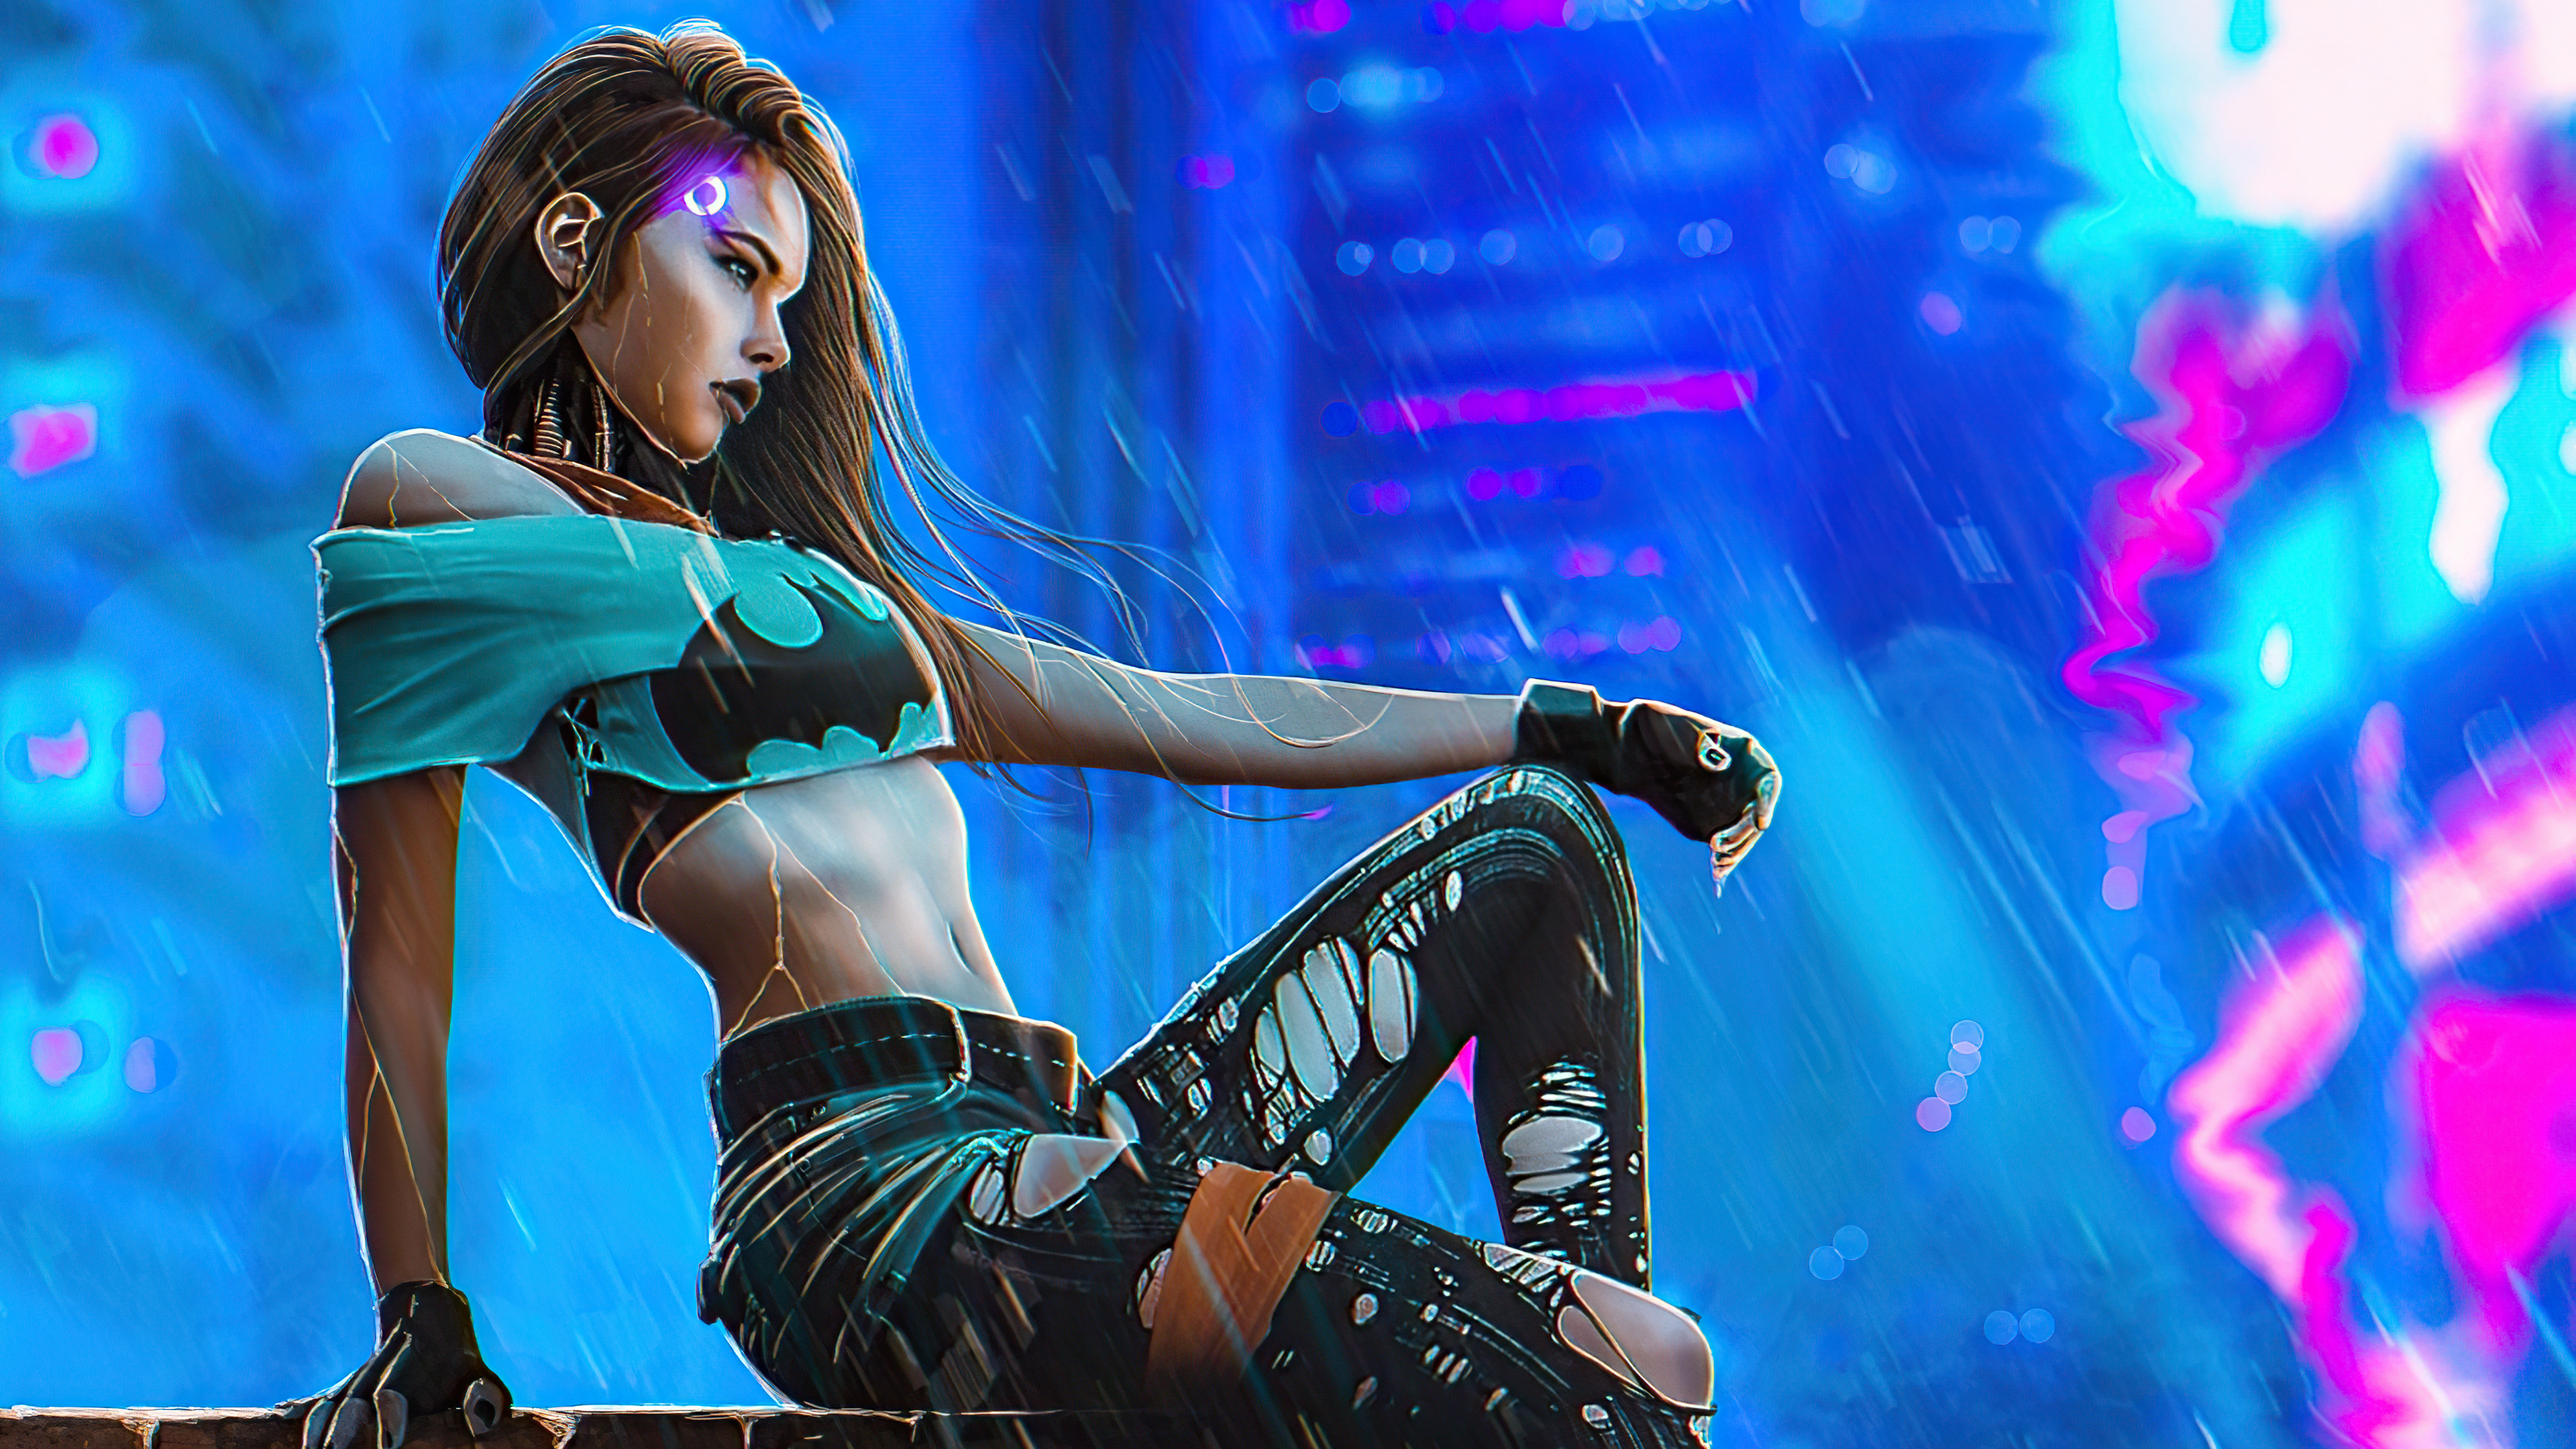 Cyberpunk Style Modern Girl 4k, HD Artist, 4k Wallpaper, Image, Background, Photo and Picture